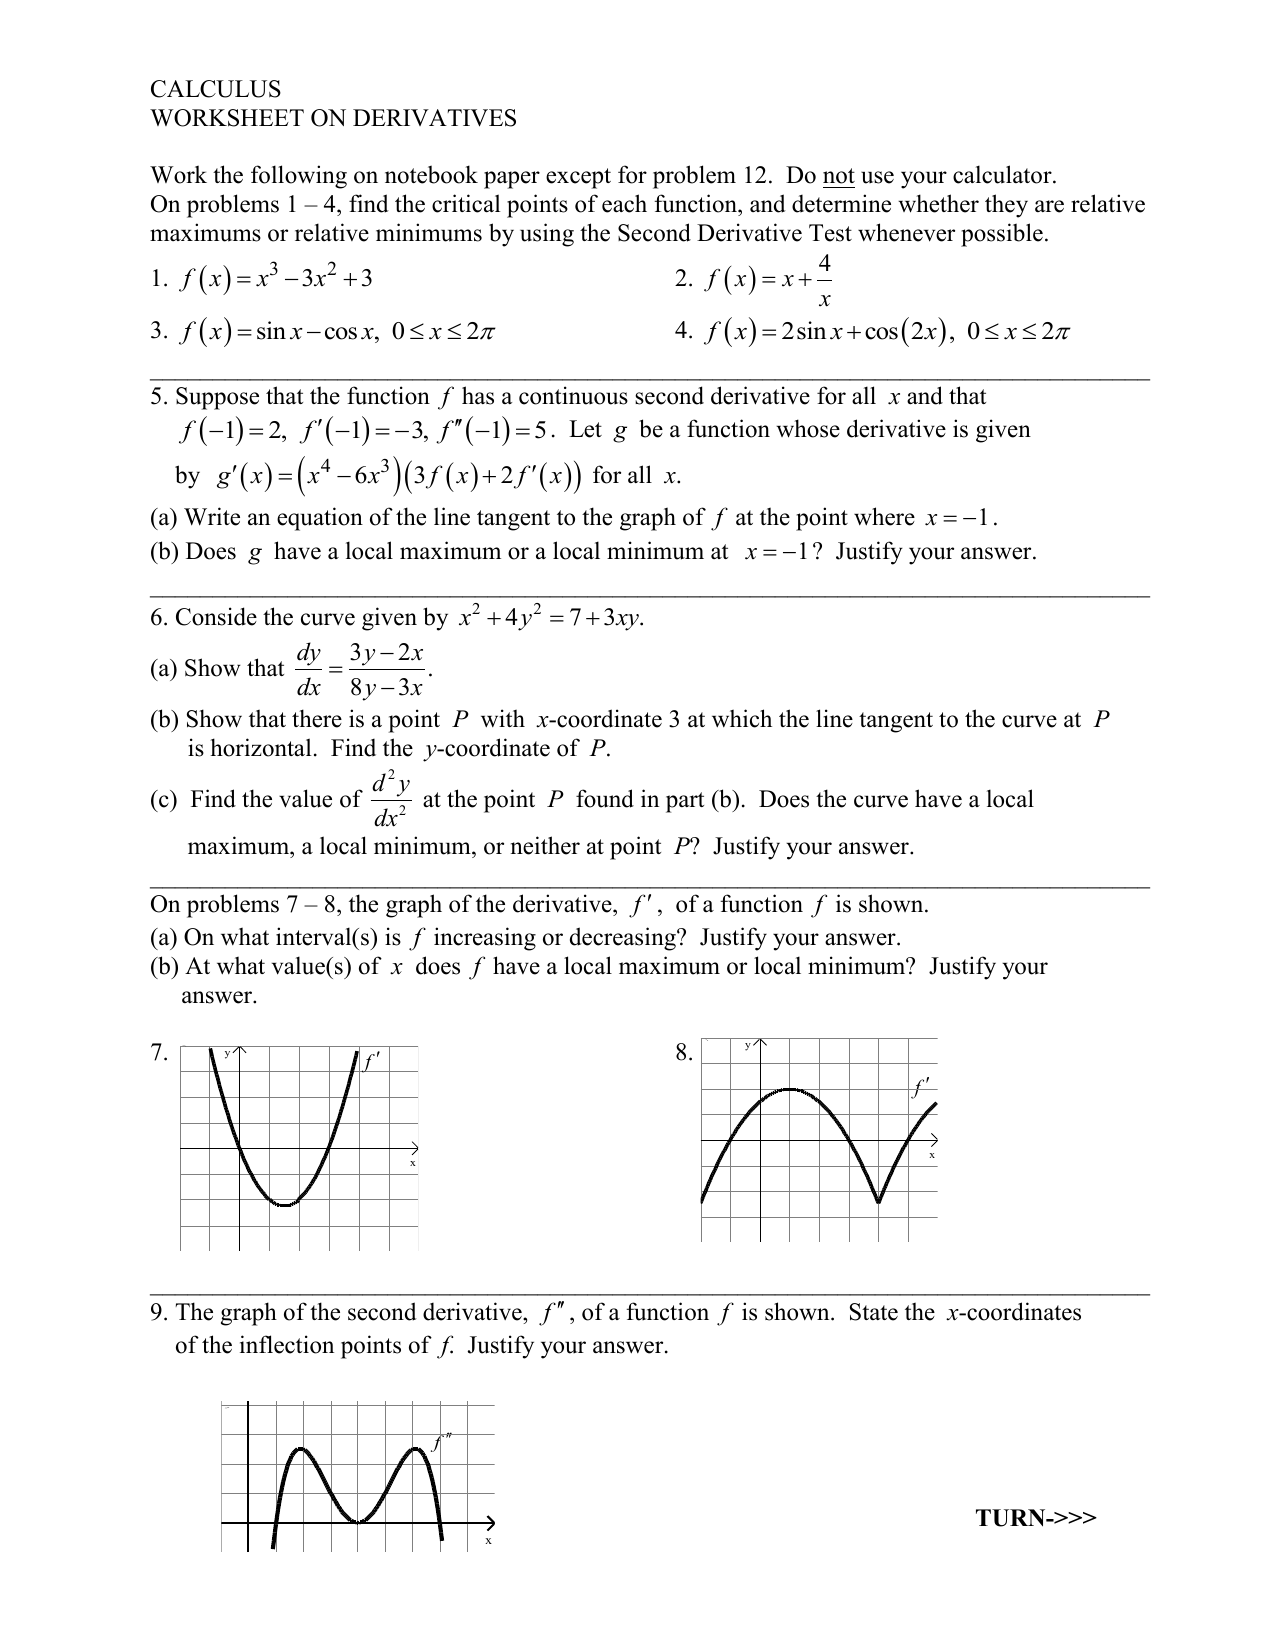 calculus-second-derivative-test-worksheet-free-download-goodimg-co